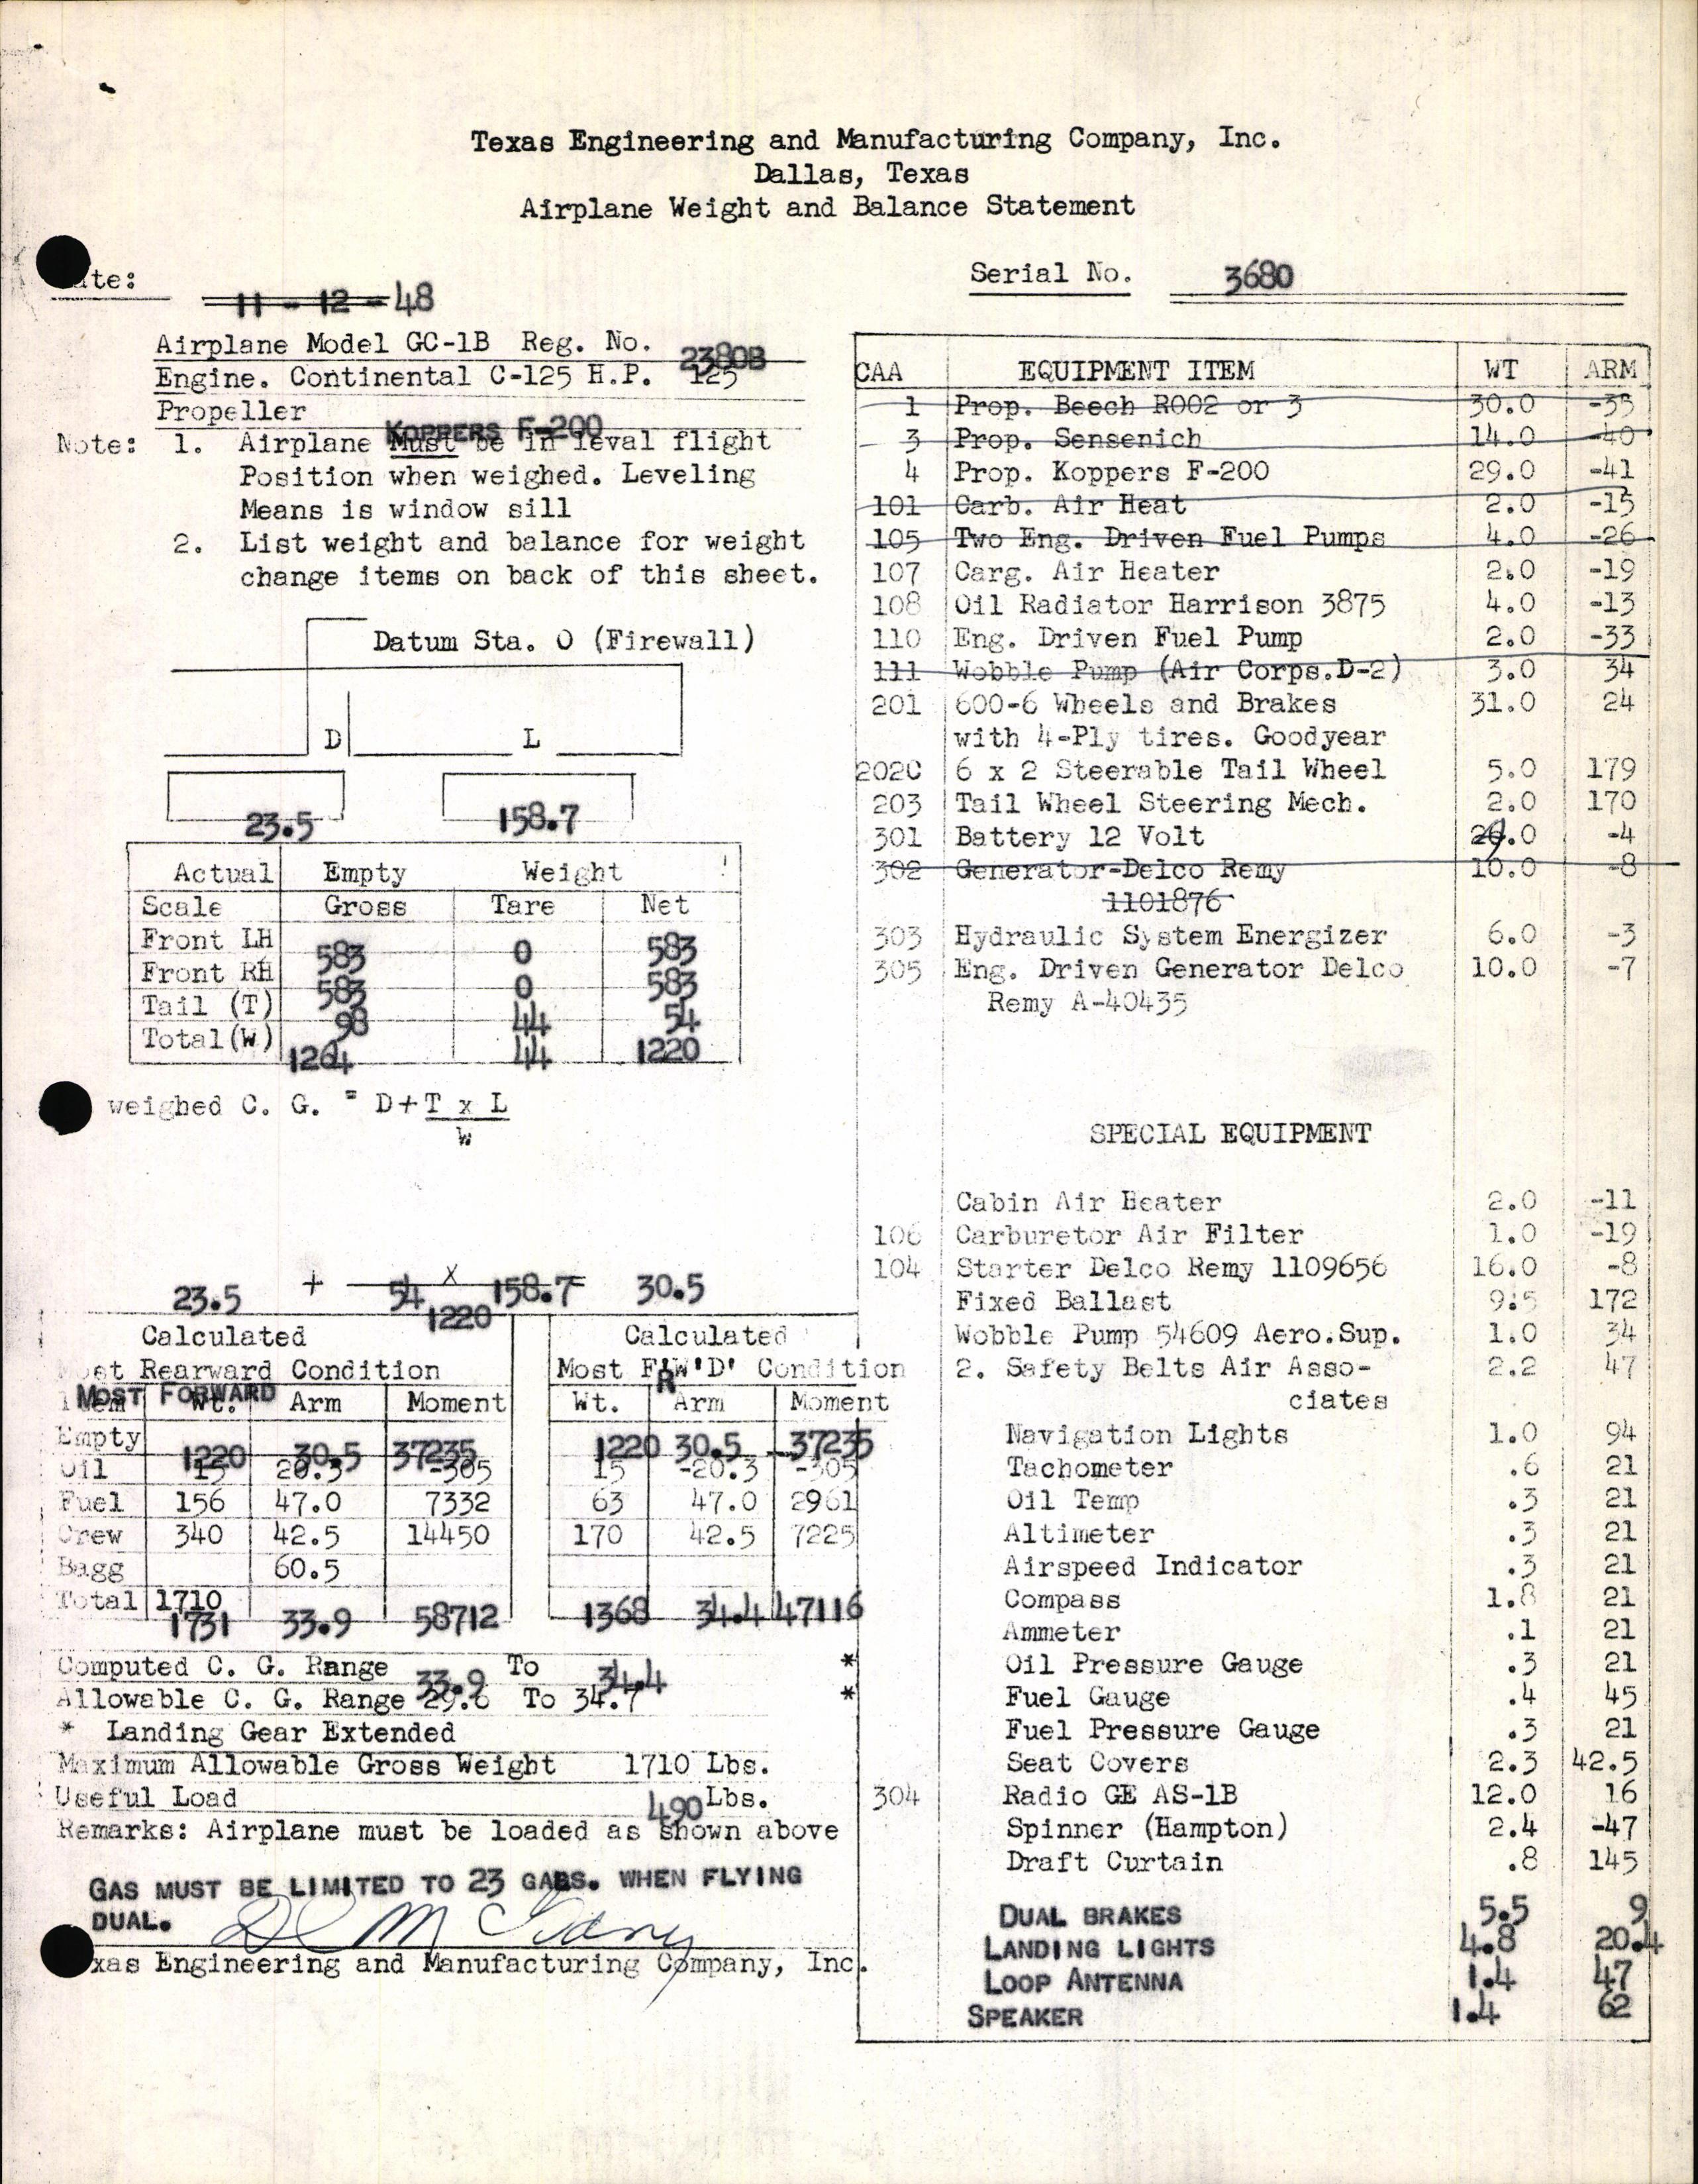 Sample page 3 from AirCorps Library document: Technical Information for Serial Number 3680